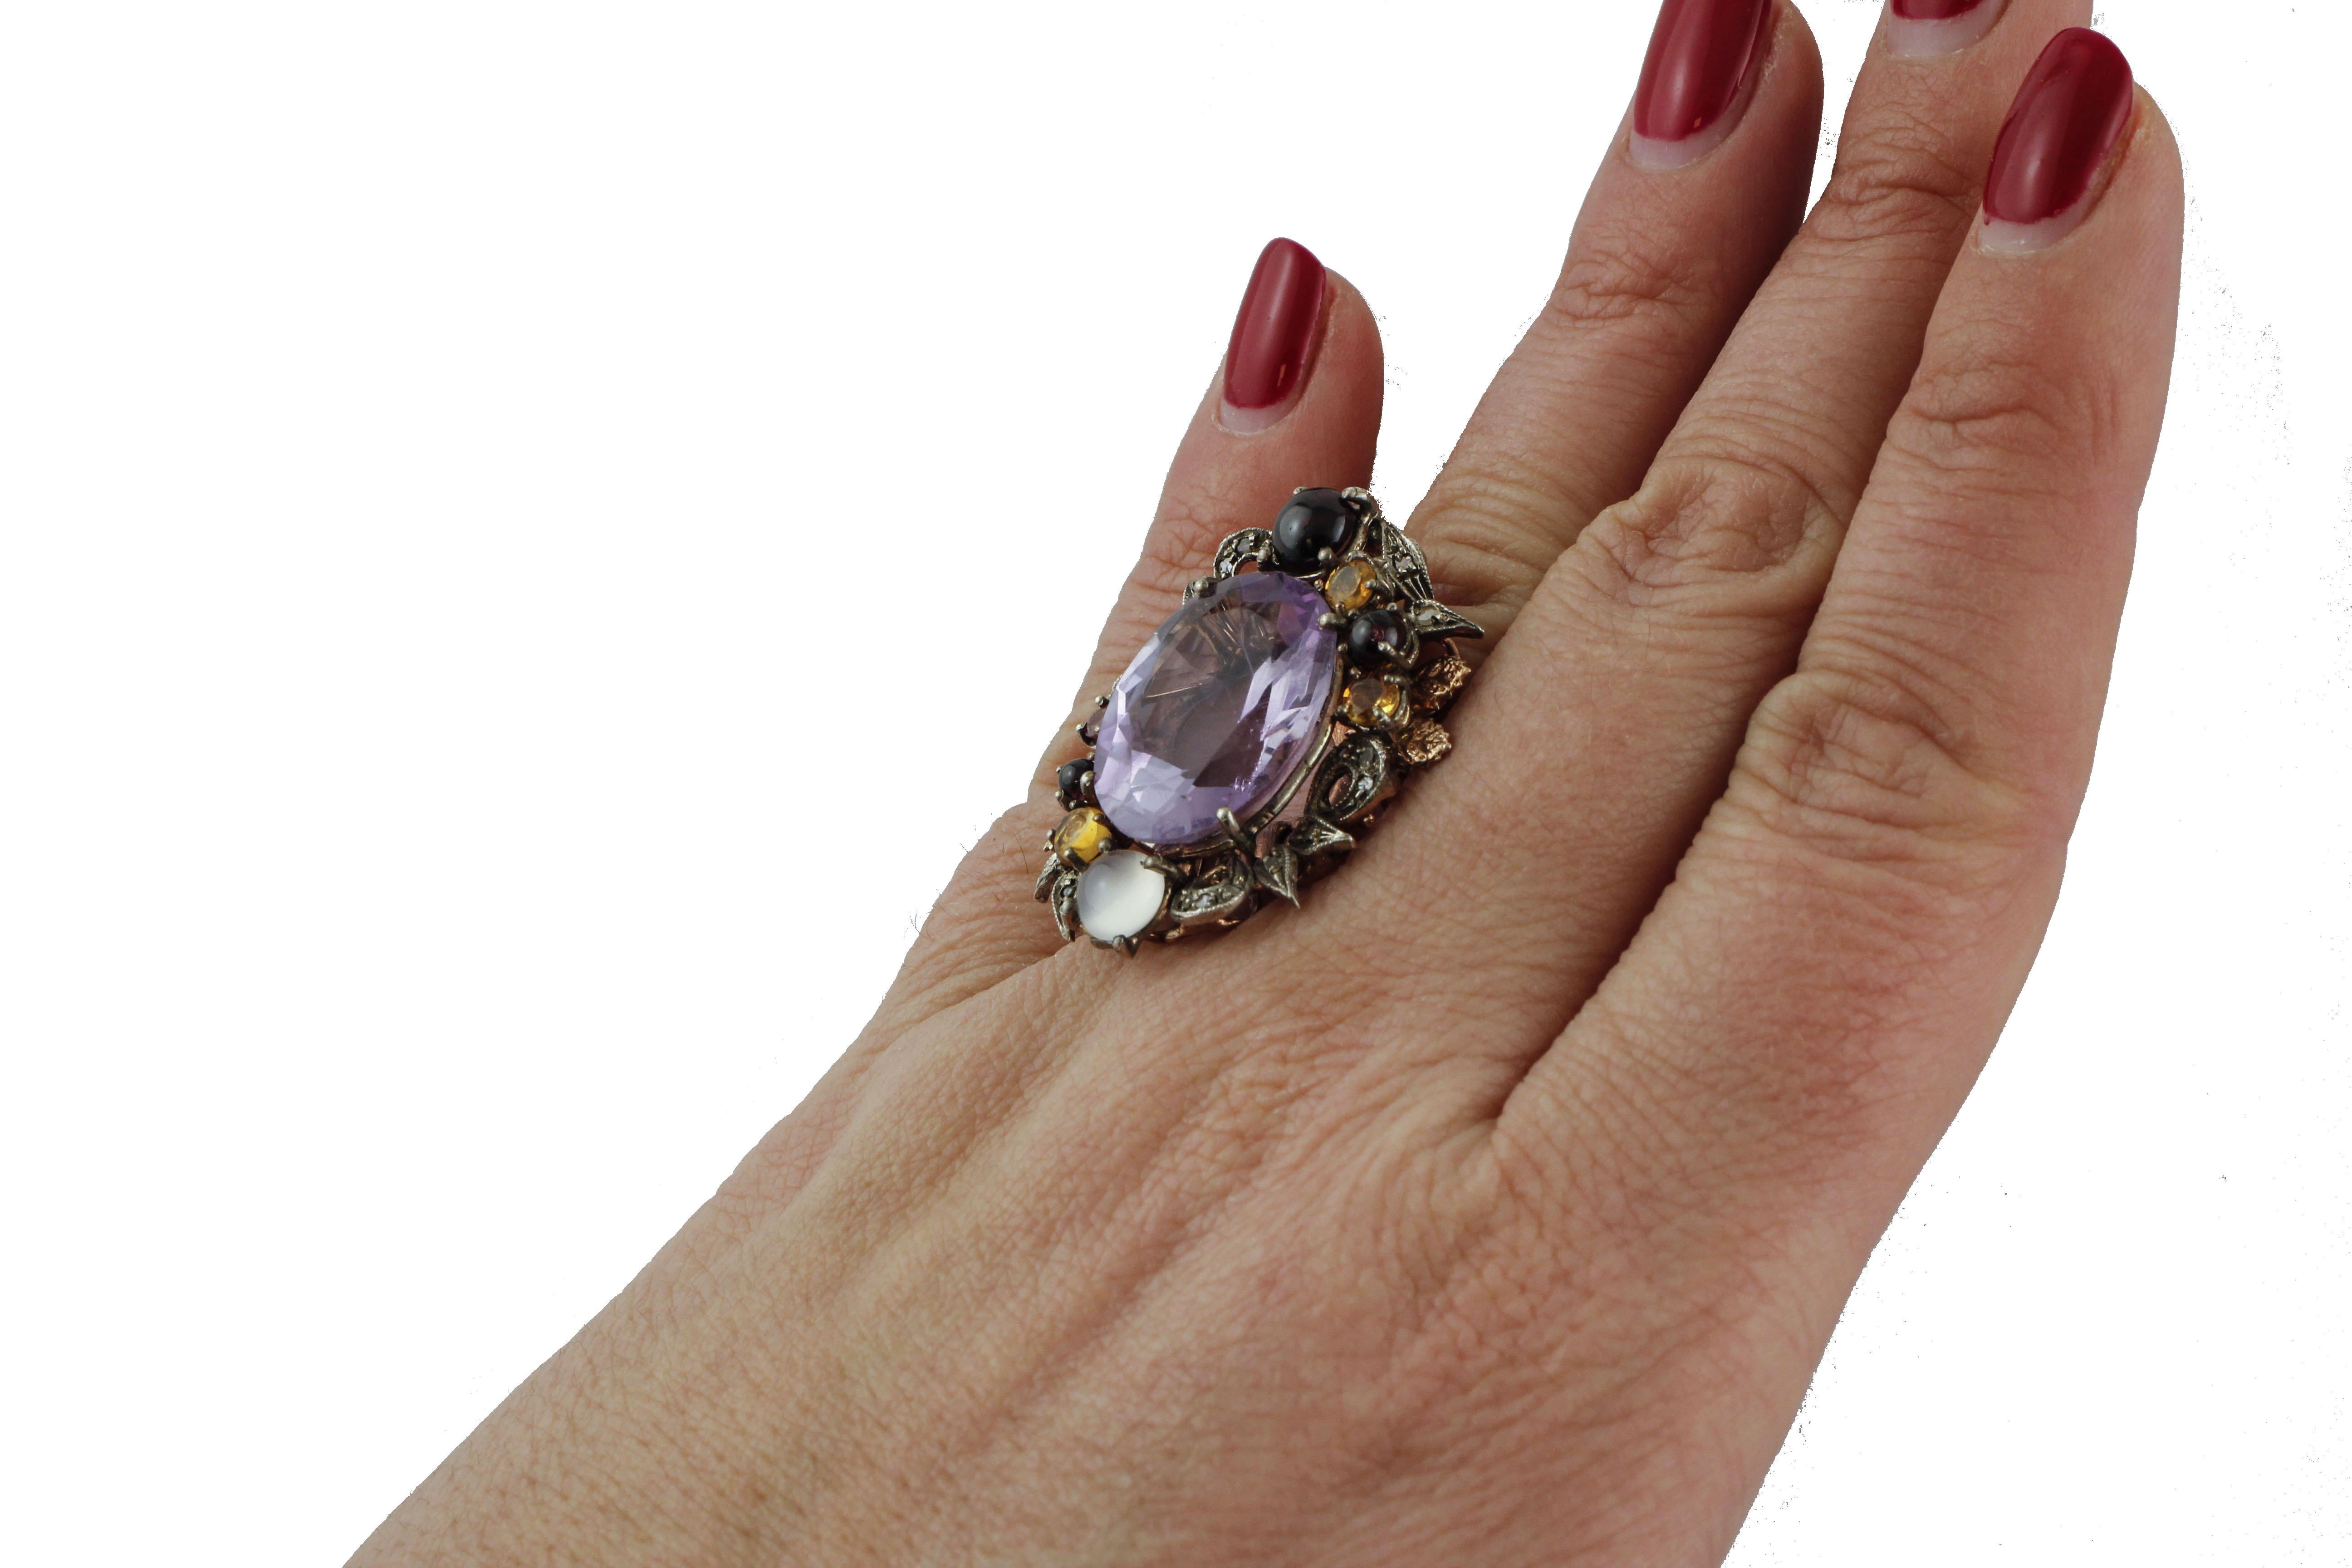 Diamonds Amethyst Yellow Topazes, Garnets Moonstone Rose Gold and Silver Ring 2